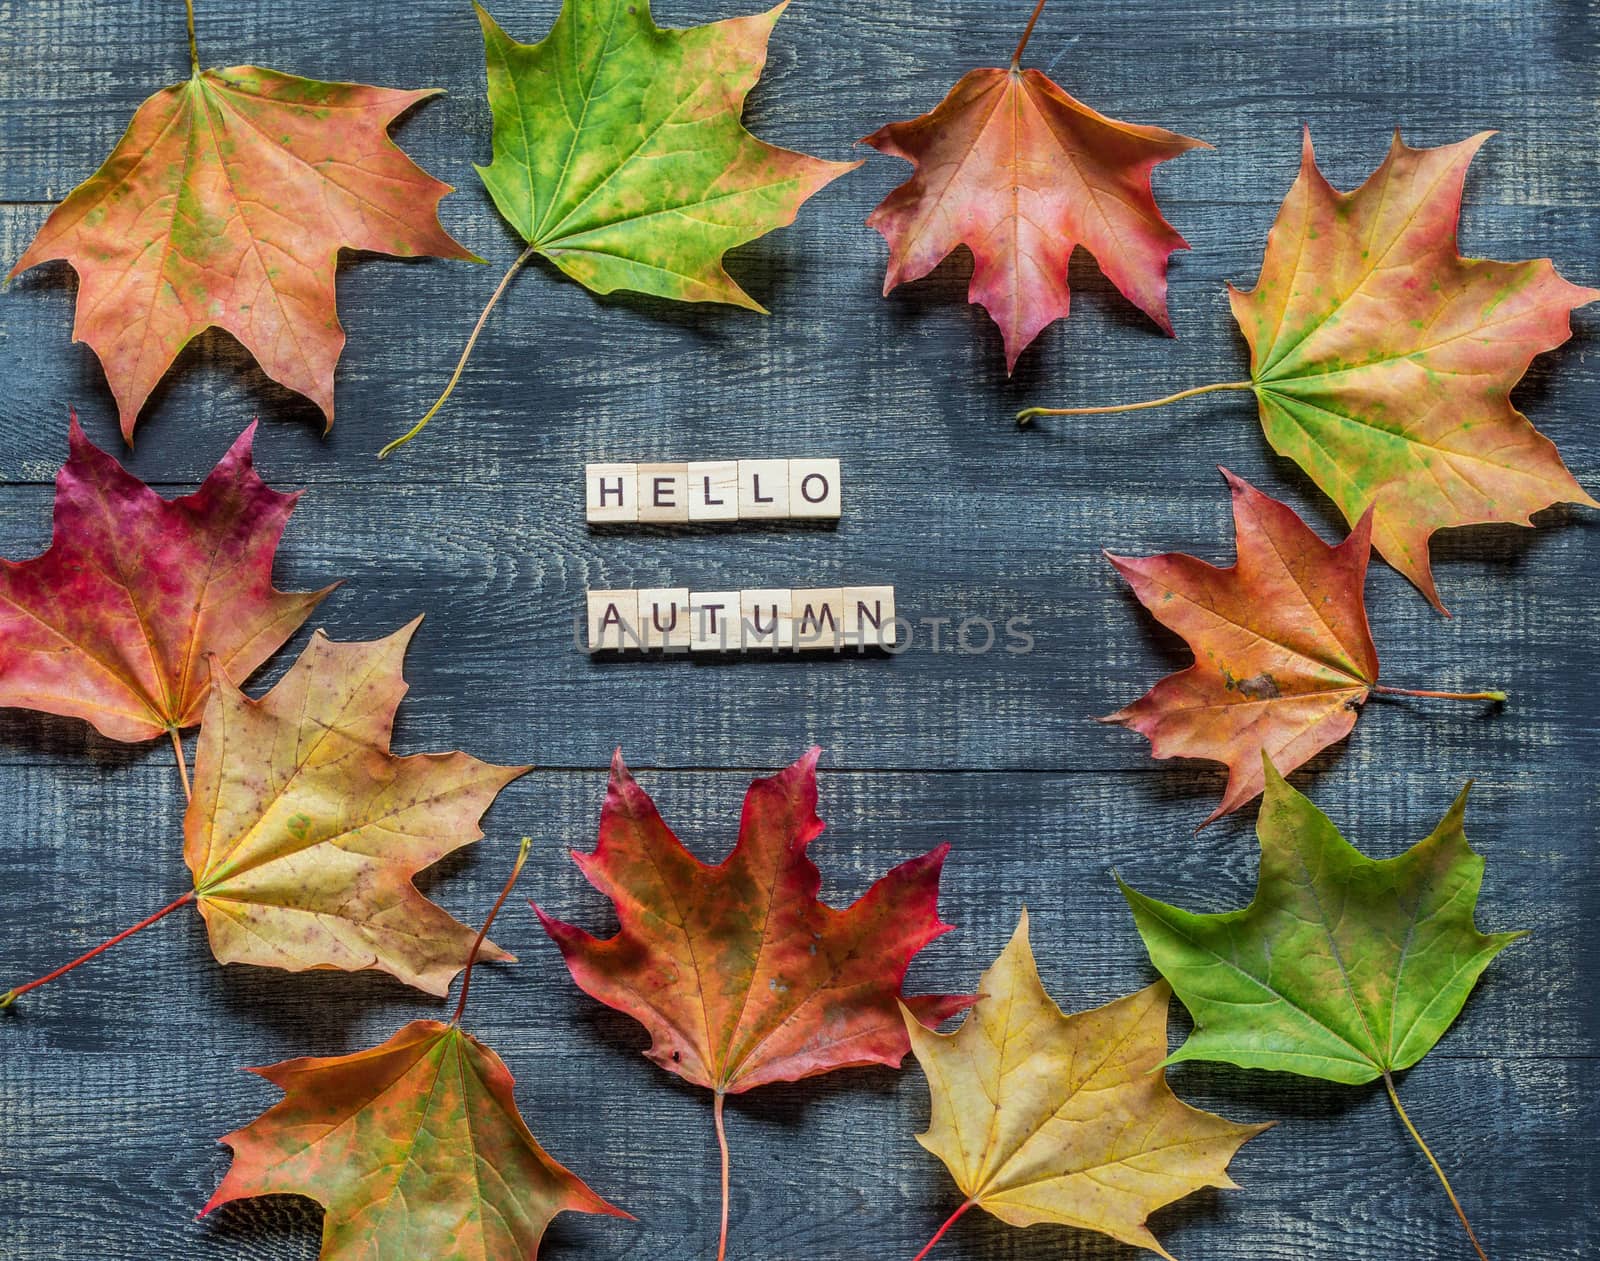 Autumn flat lay with multicolored fallen leaves and hello autumn lettering on wooden background